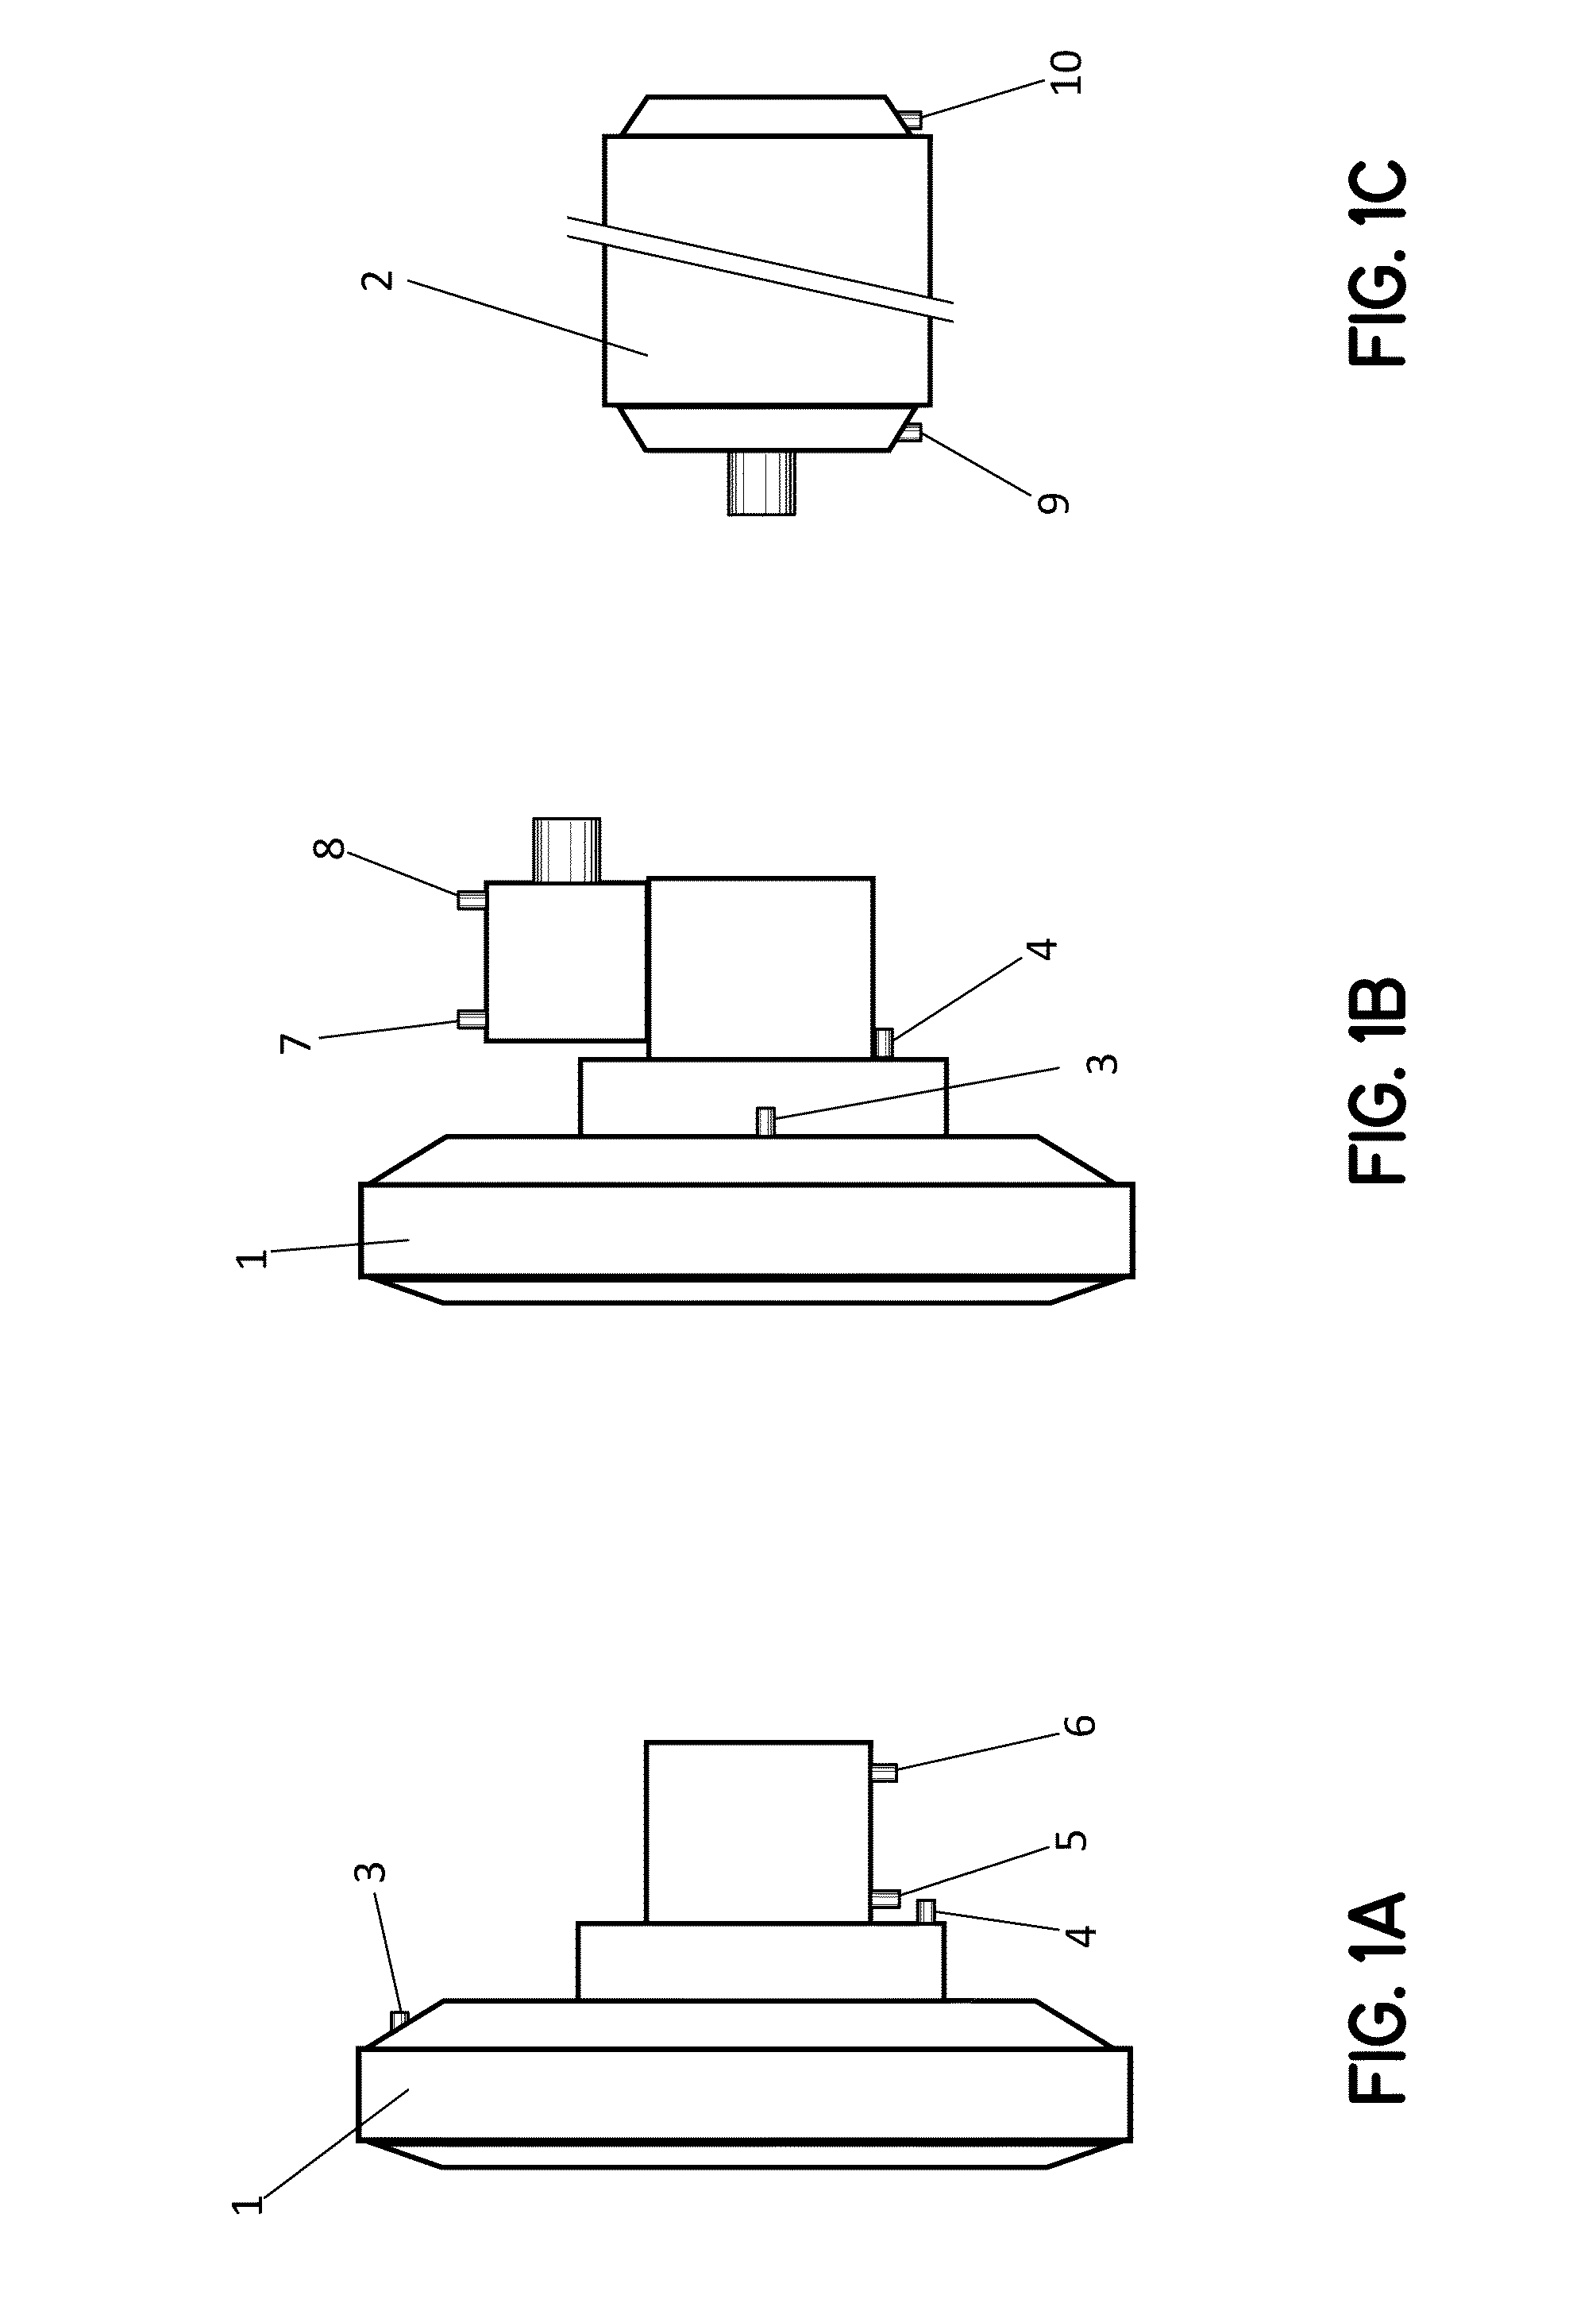 Method and system for controlling operation of a wind turbine